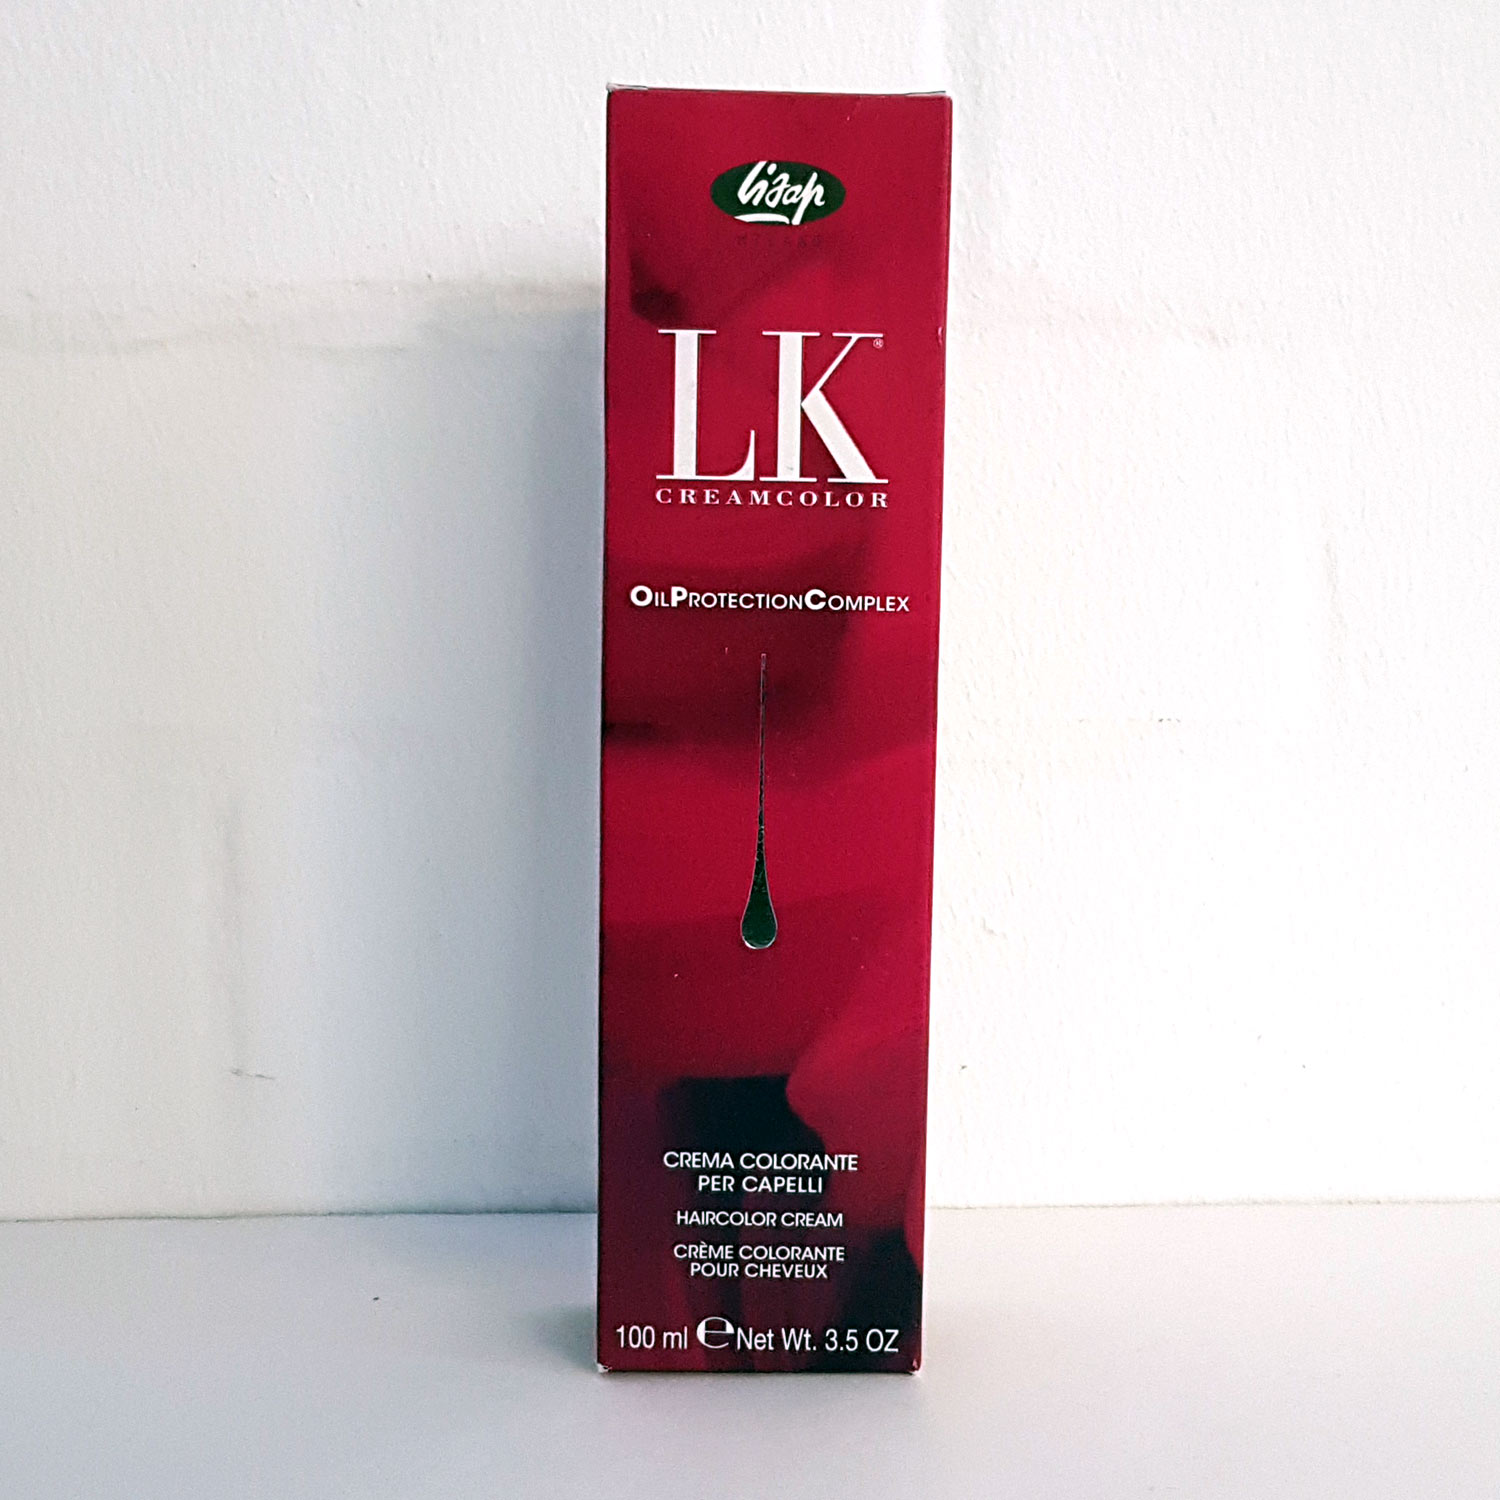 LISAP LK Creamcolor Oil Protection Complex